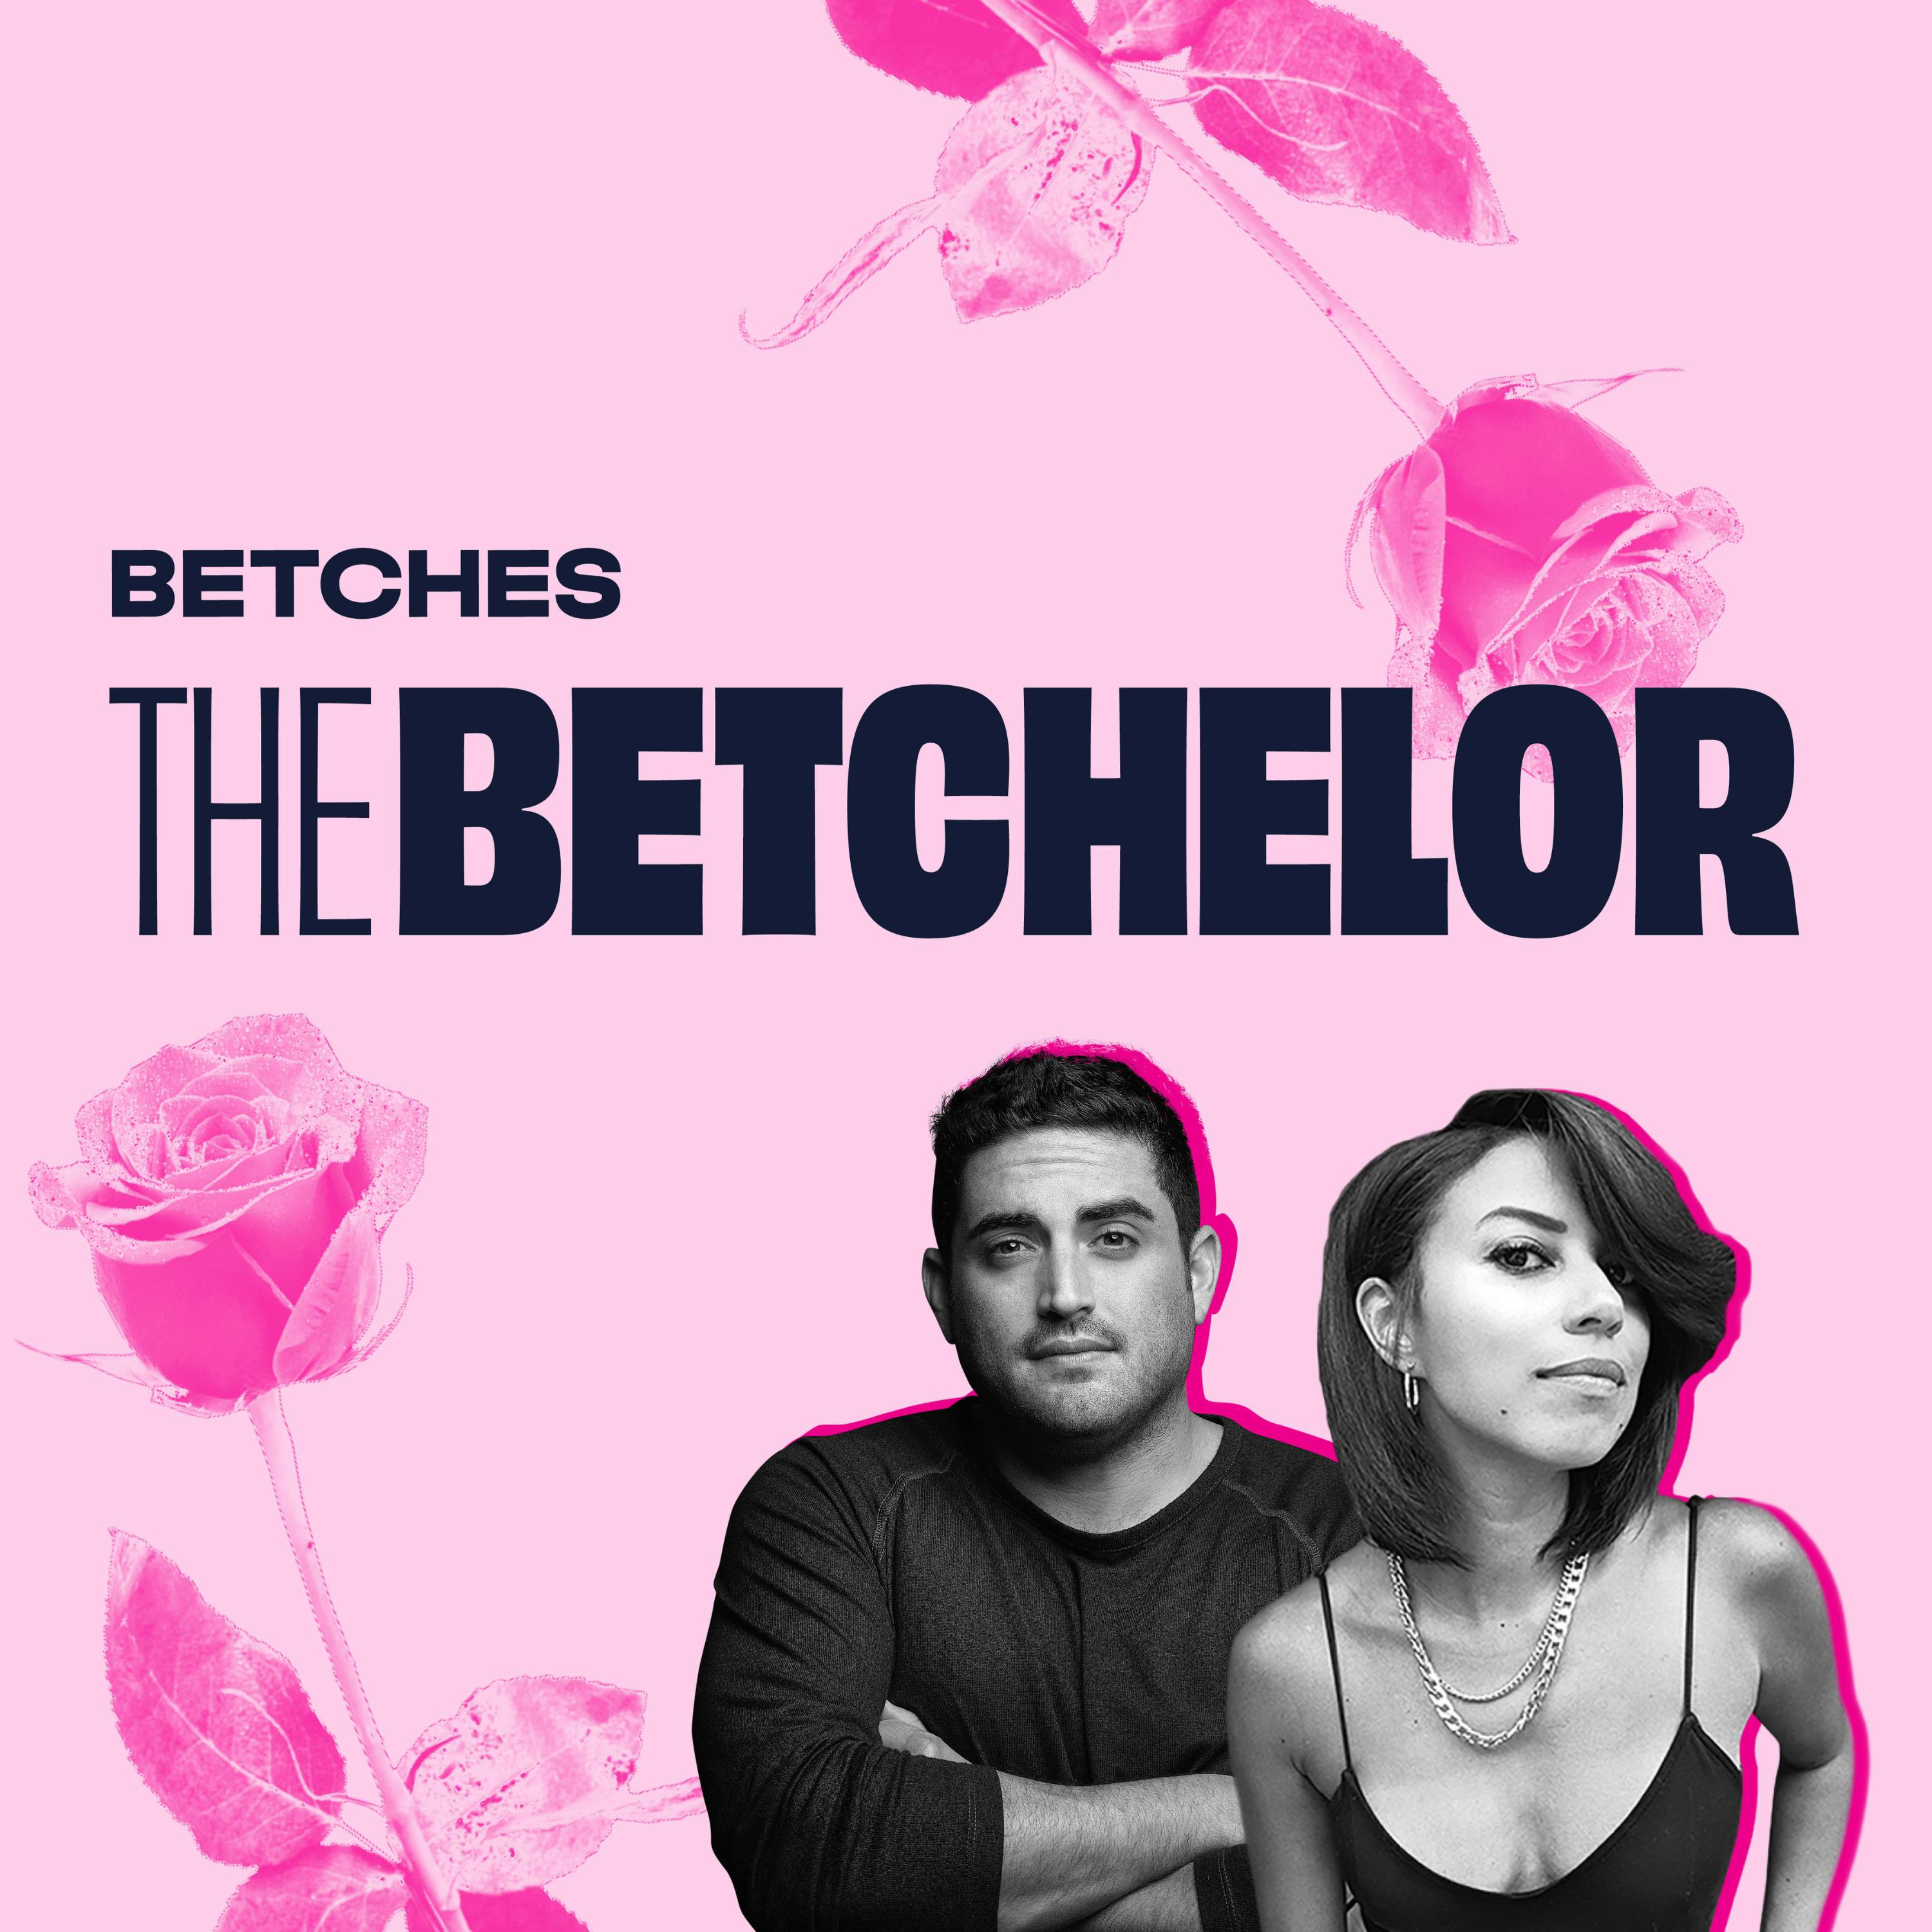 The Betchelor:Betches Media